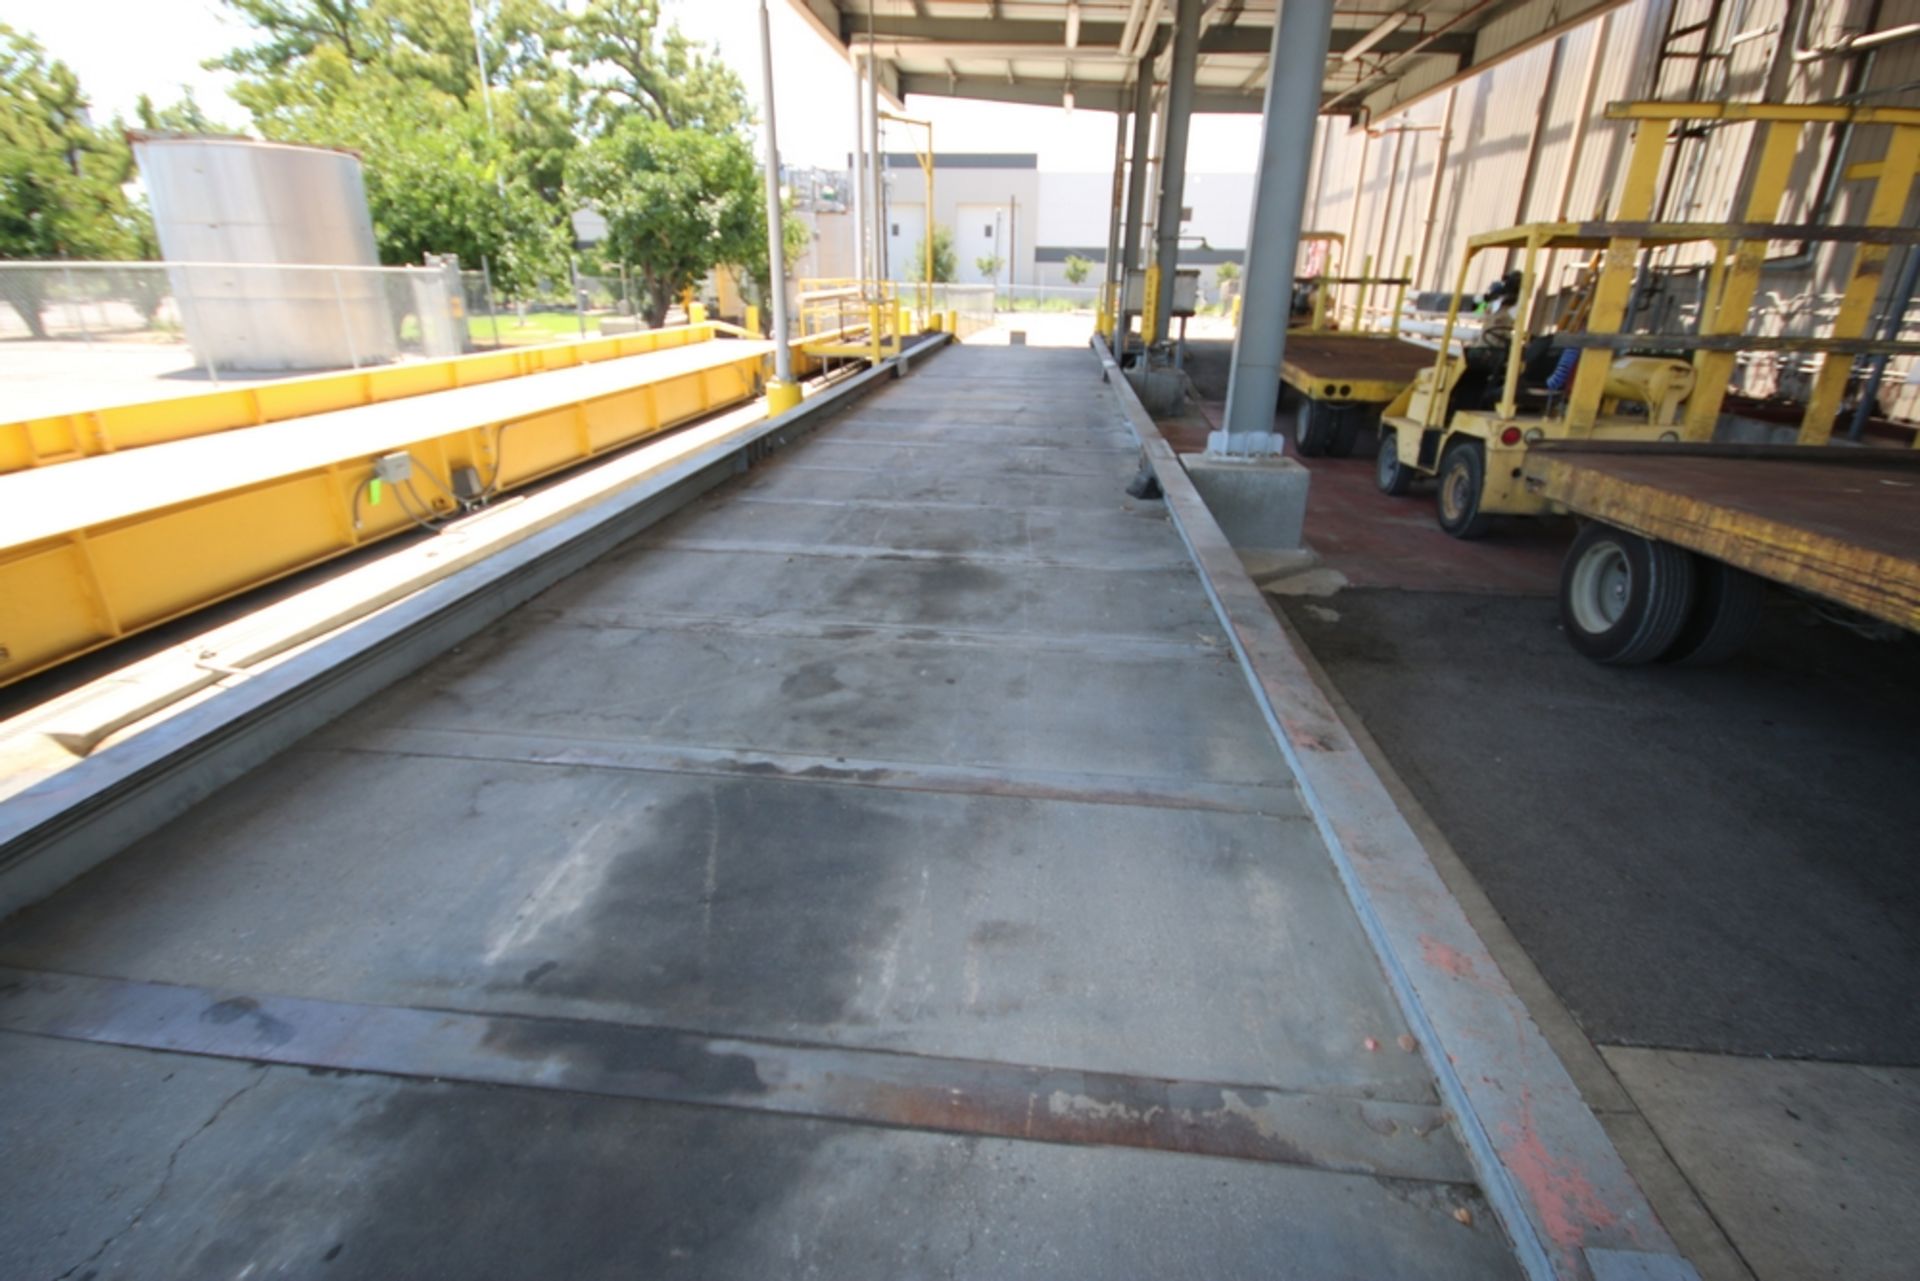 120,000 lb. Capacity Above Ground Truck Scale, Deck Dims.: Aprox. 70' L x 10' W, with Rice Lake - Image 3 of 4